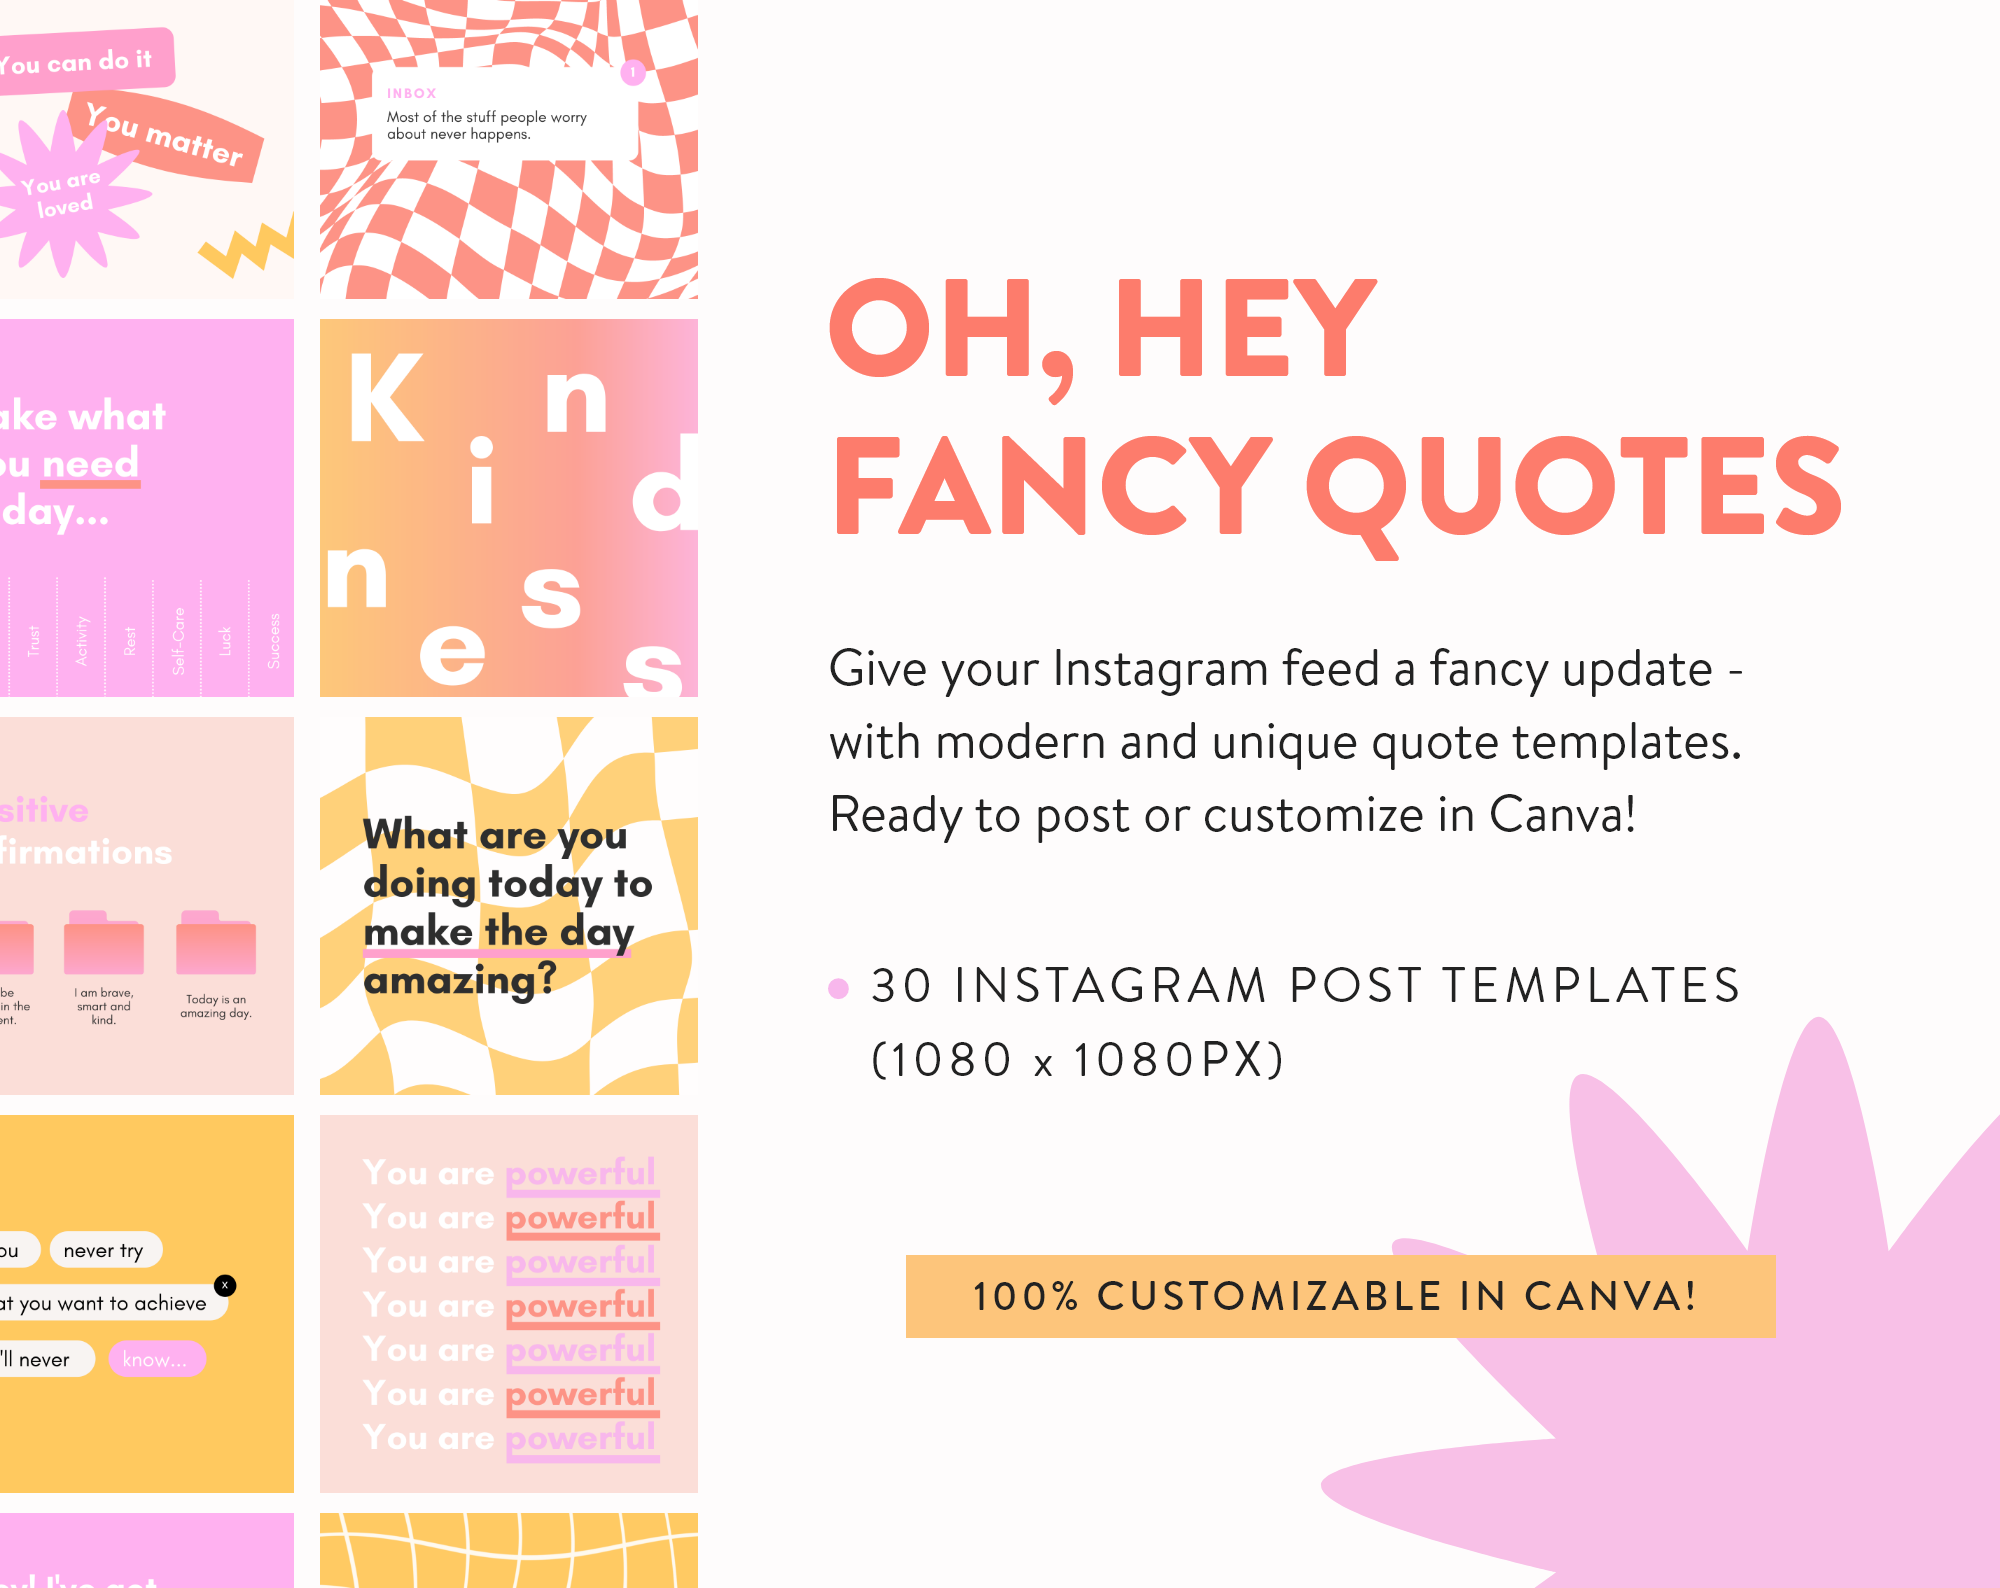 Fancy-quotes-for-instagram-template-pack-canva-start-1